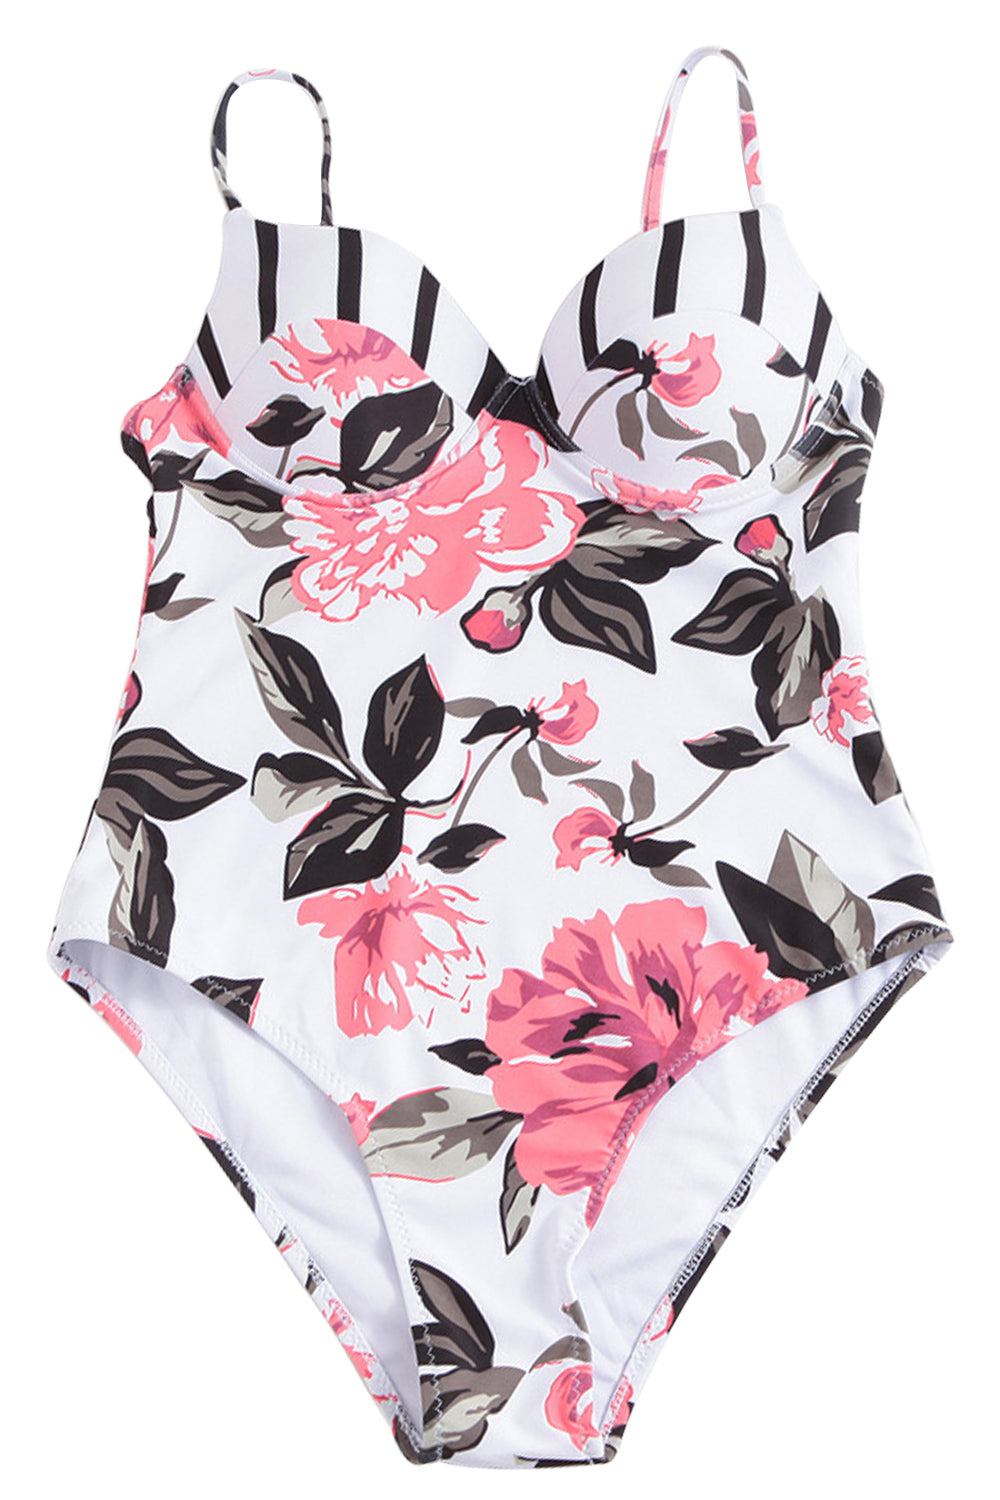 Iyasson Romantic Floral Print One-piece Swimsuit